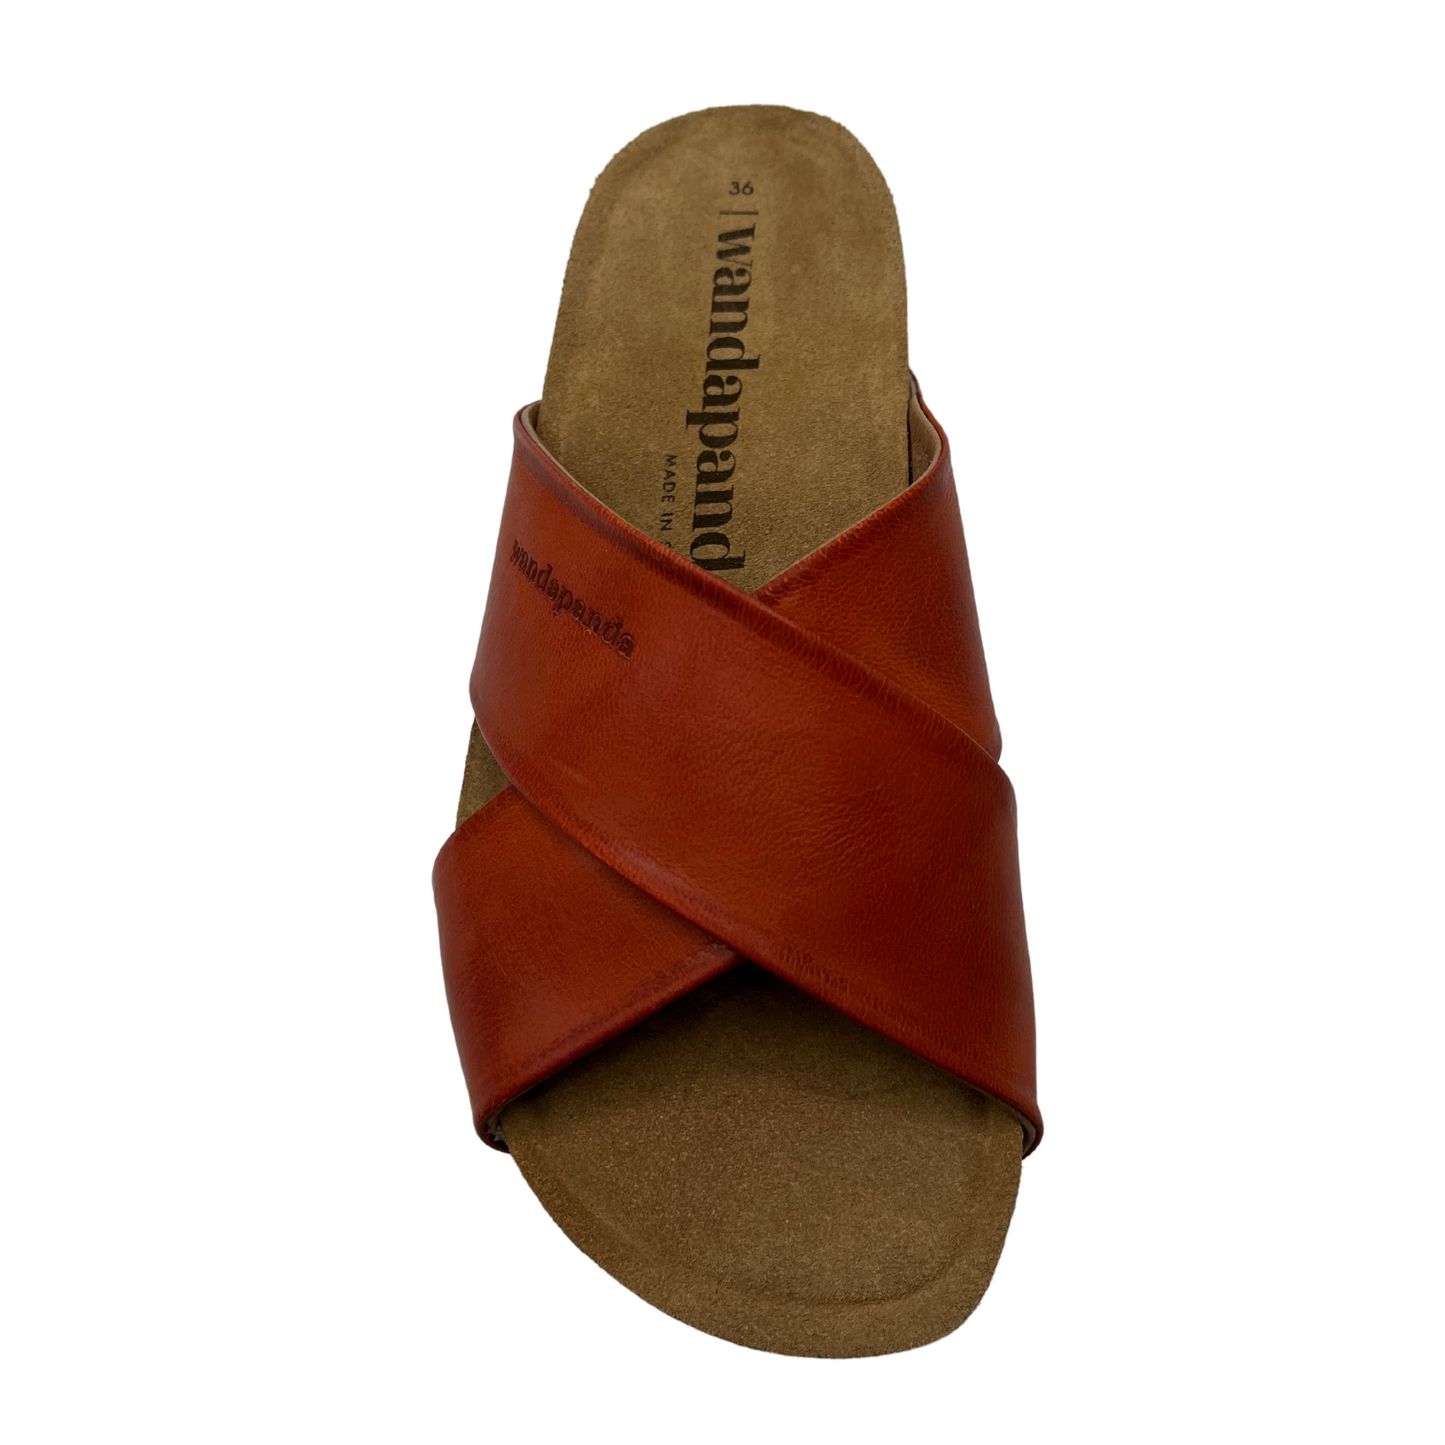 Top view of red leather sandal with cross straps on the upper